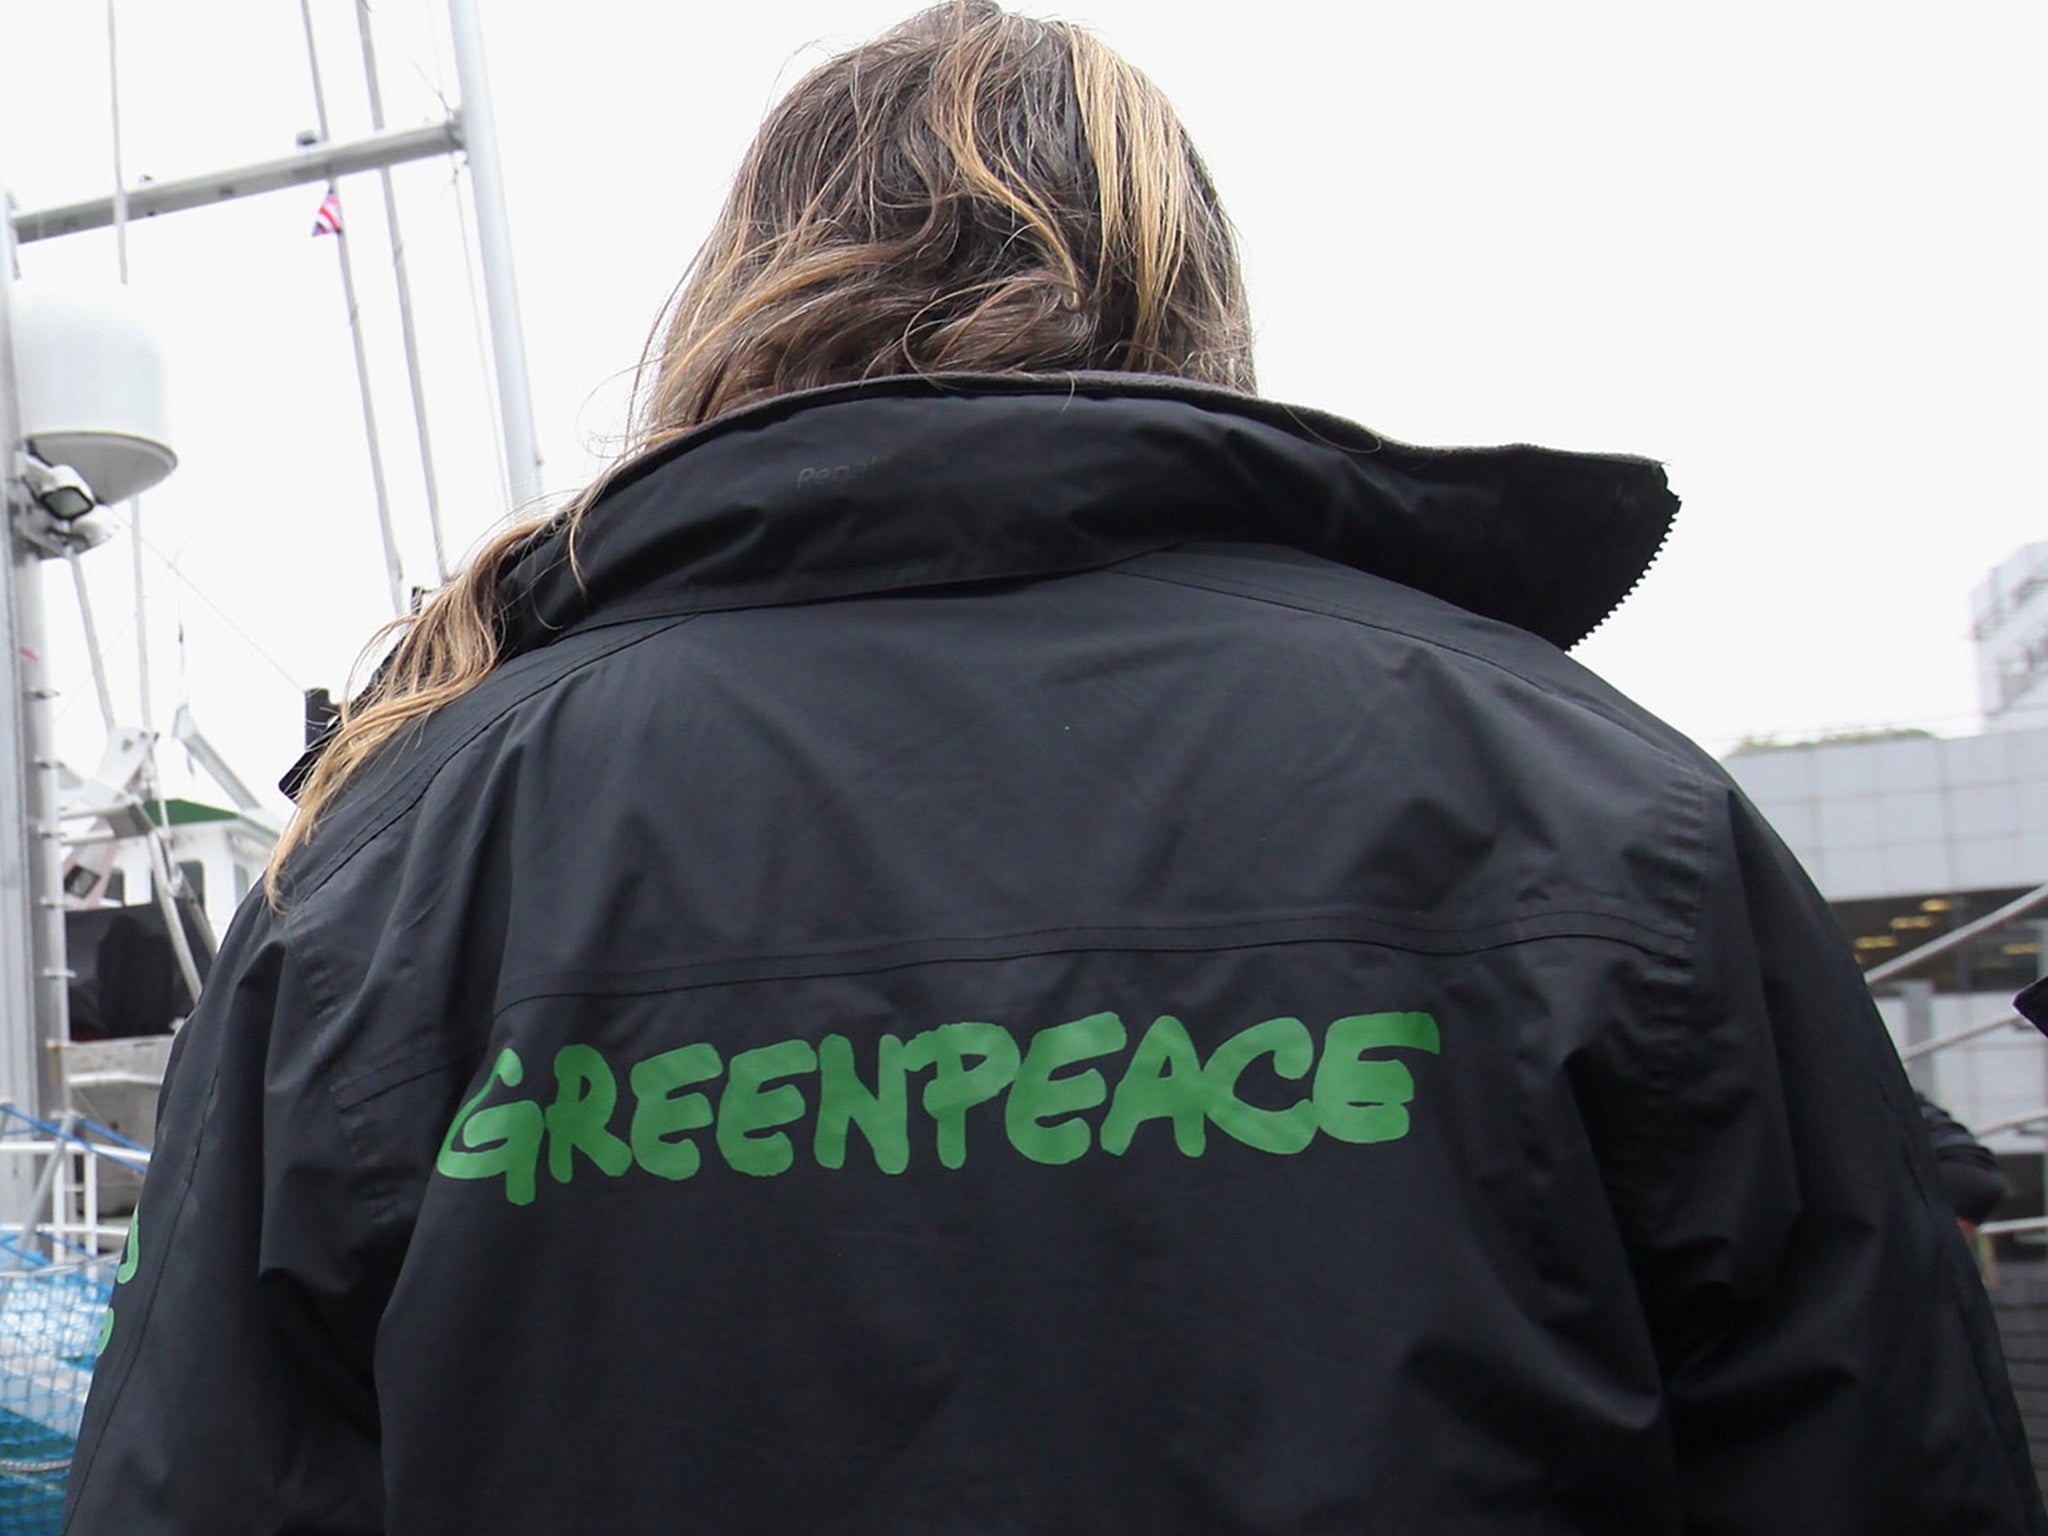 Greenpeace are among the signatories